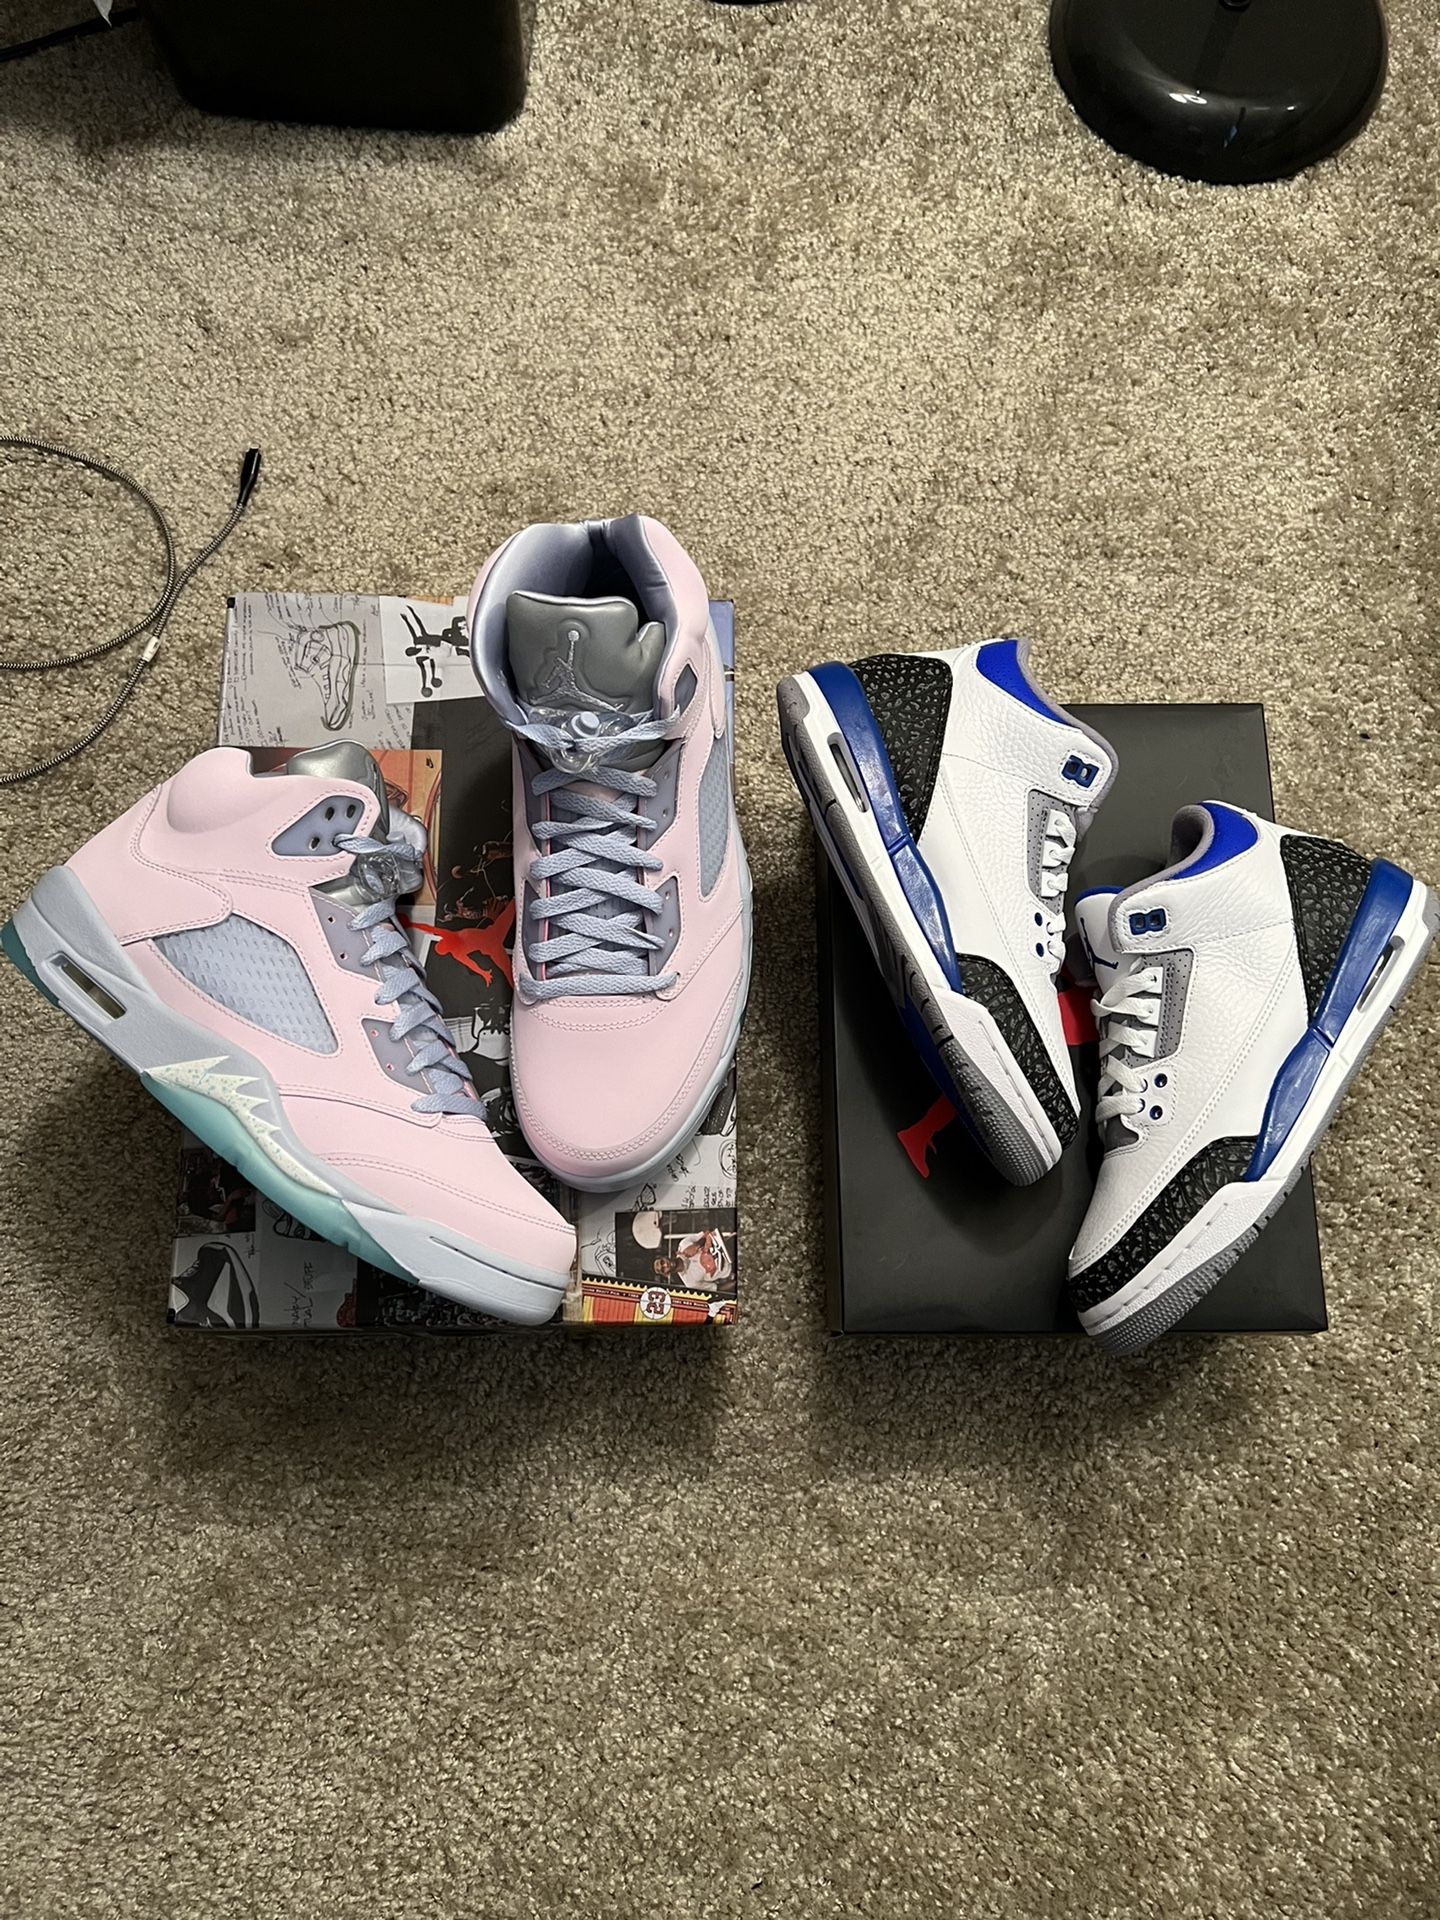 Easter 5 Size 10 & Racer Blue 3 Size 5.5Y